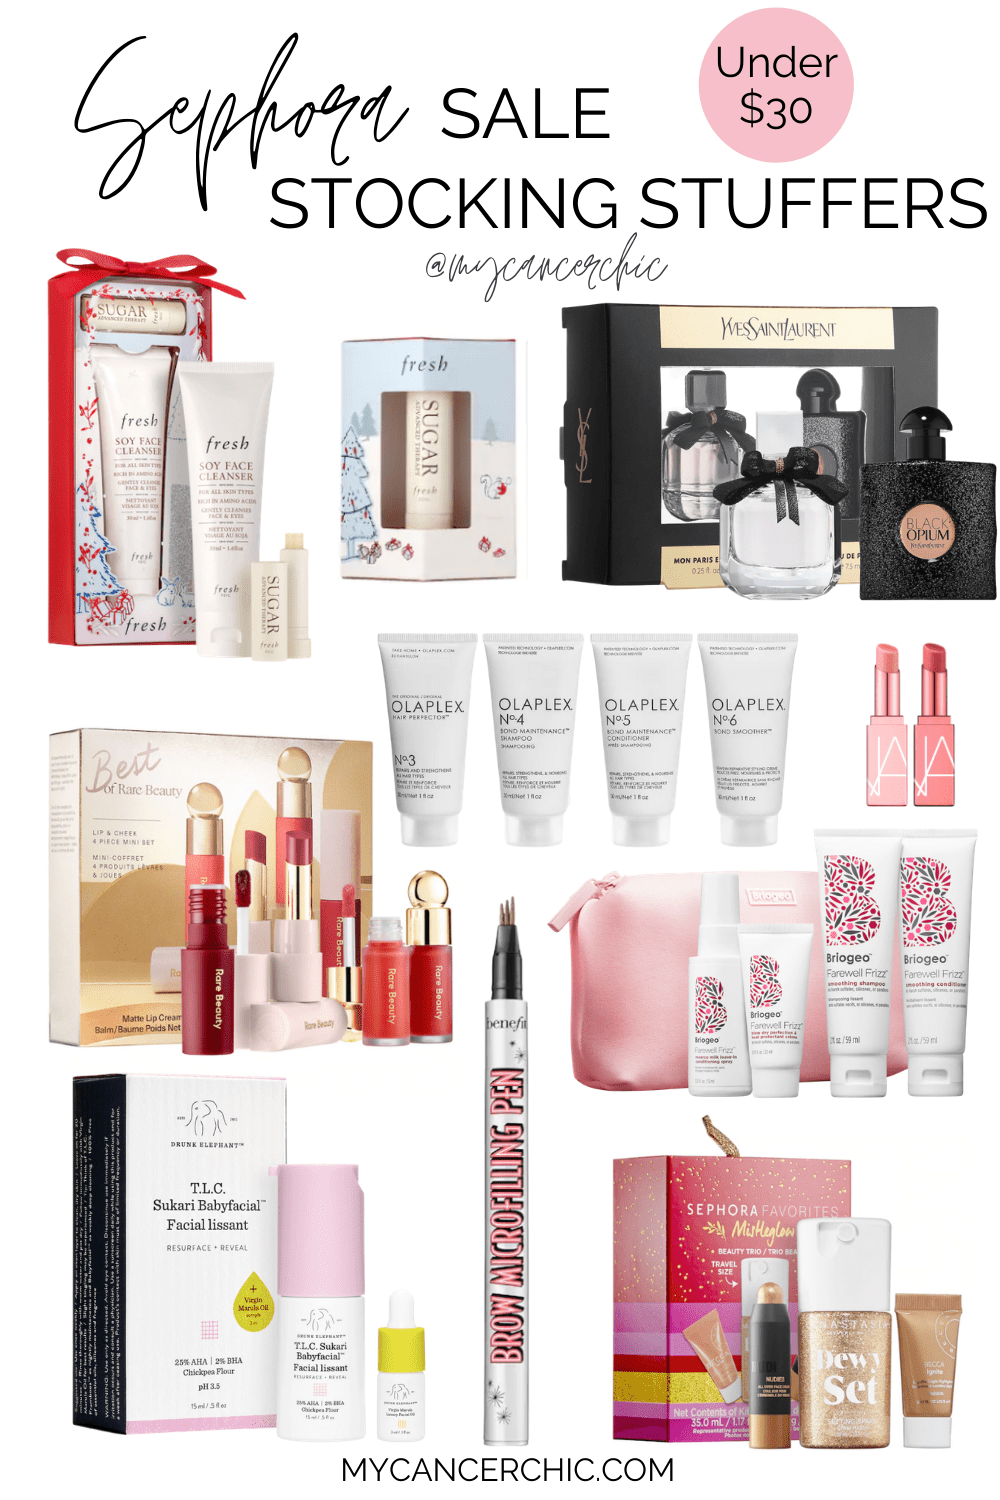 Sephora Holiday Sale Guide - Stocking Stuffers